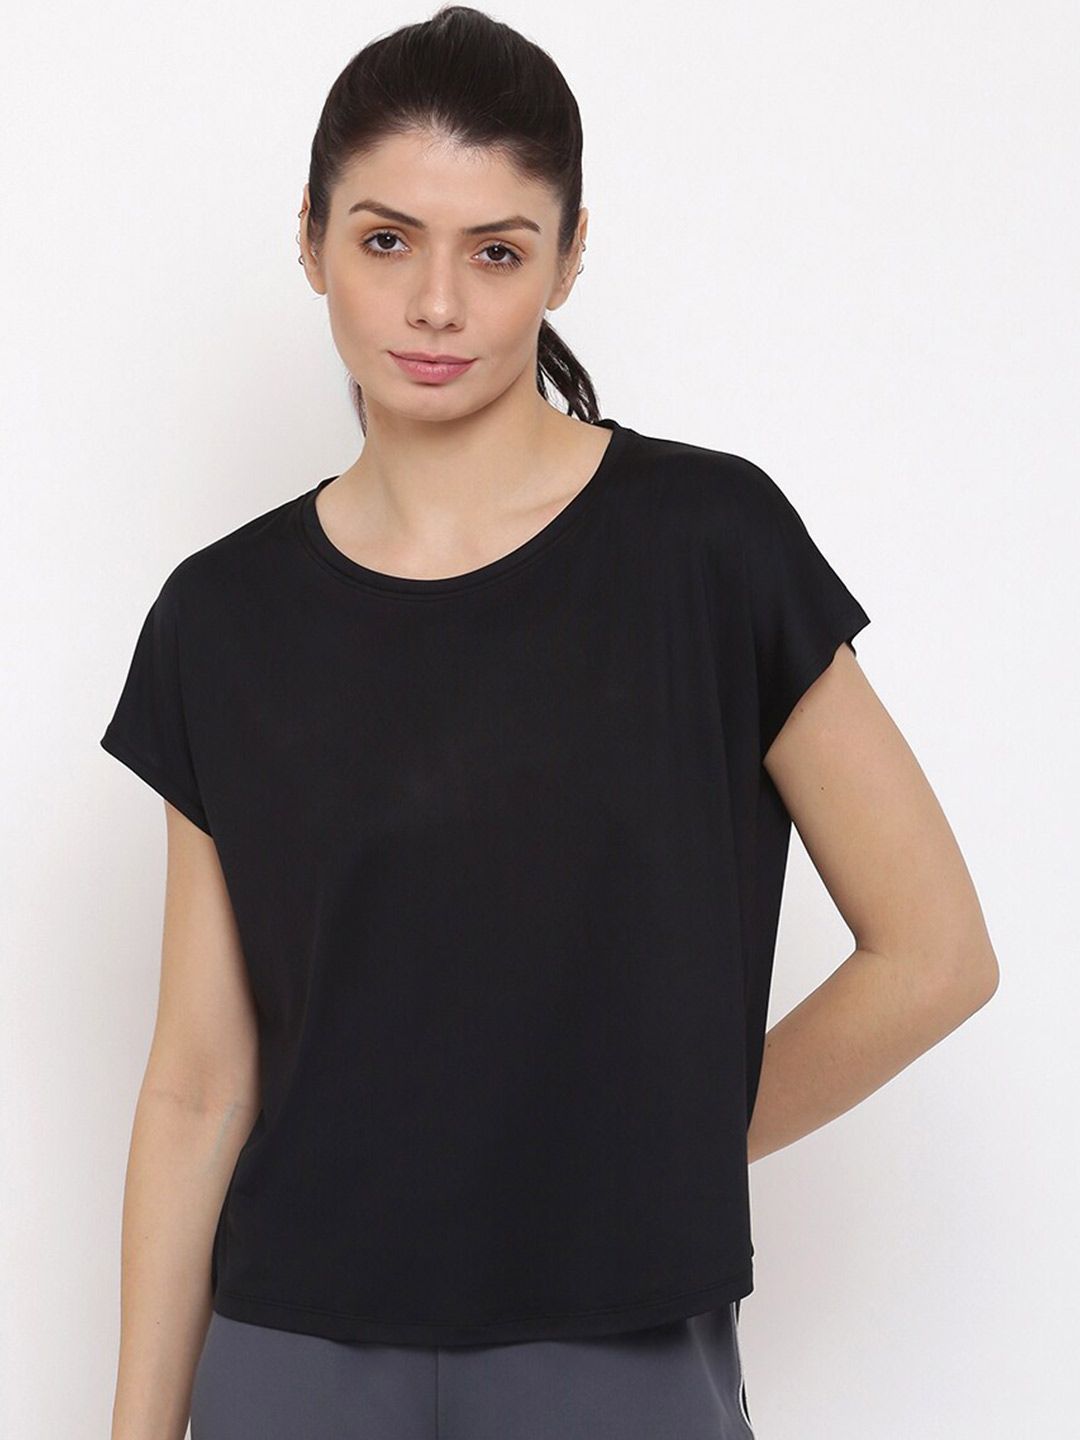 MKH Women Black Extended Sleeves Dri-FIT T-shirt Price in India